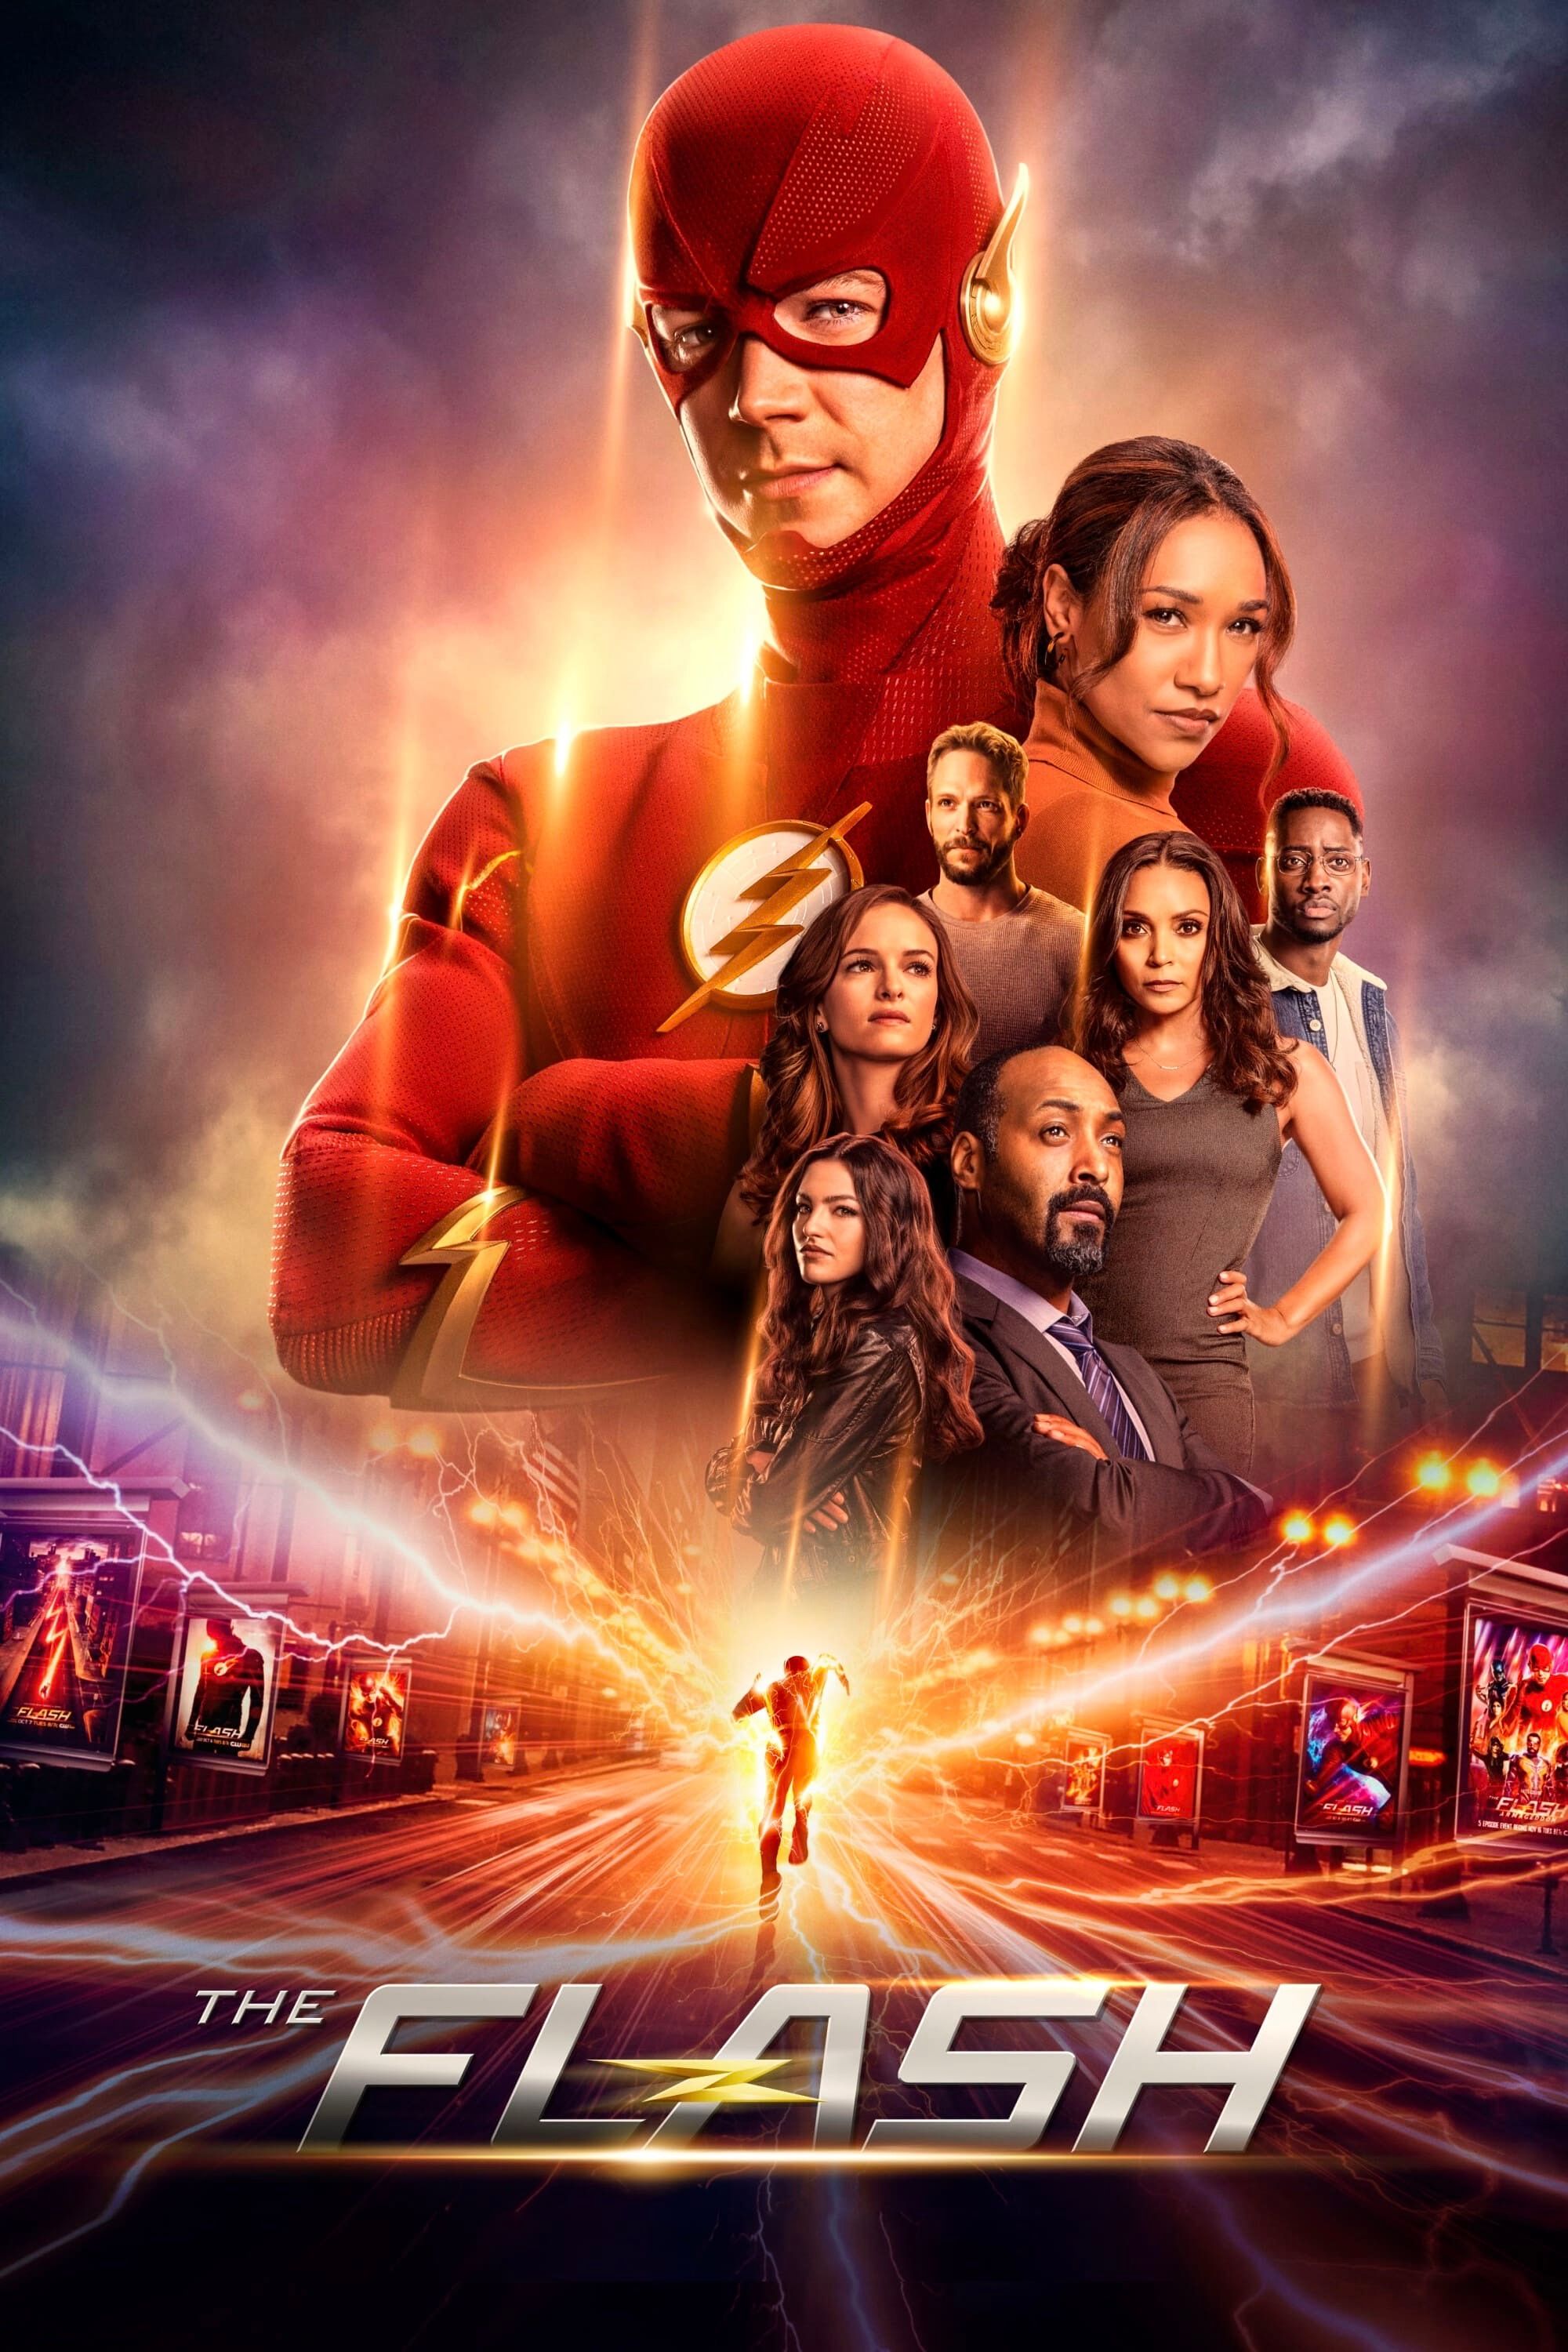 The CW's The Flash Seasons, Ranked From Worst to Best